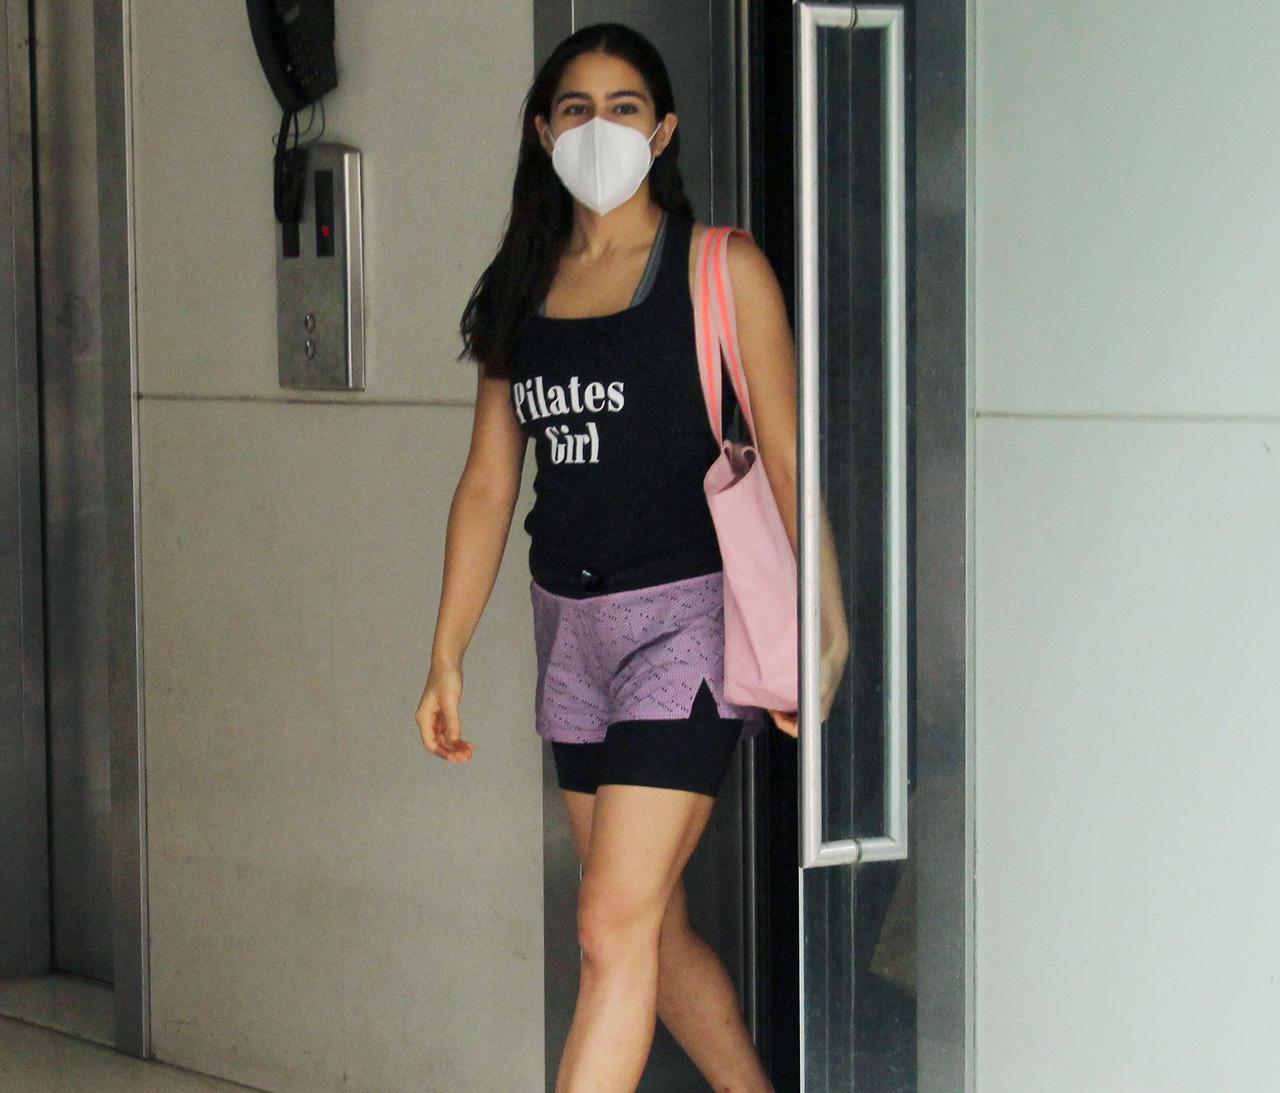 Sara Ali Khan sported a black tank top and dual coloured gym shorts as she was seen leaving her fitness studio in Bandra. Sara is, without a doubt, a 'Pilates Girl'! Going by her statement on her tank top.